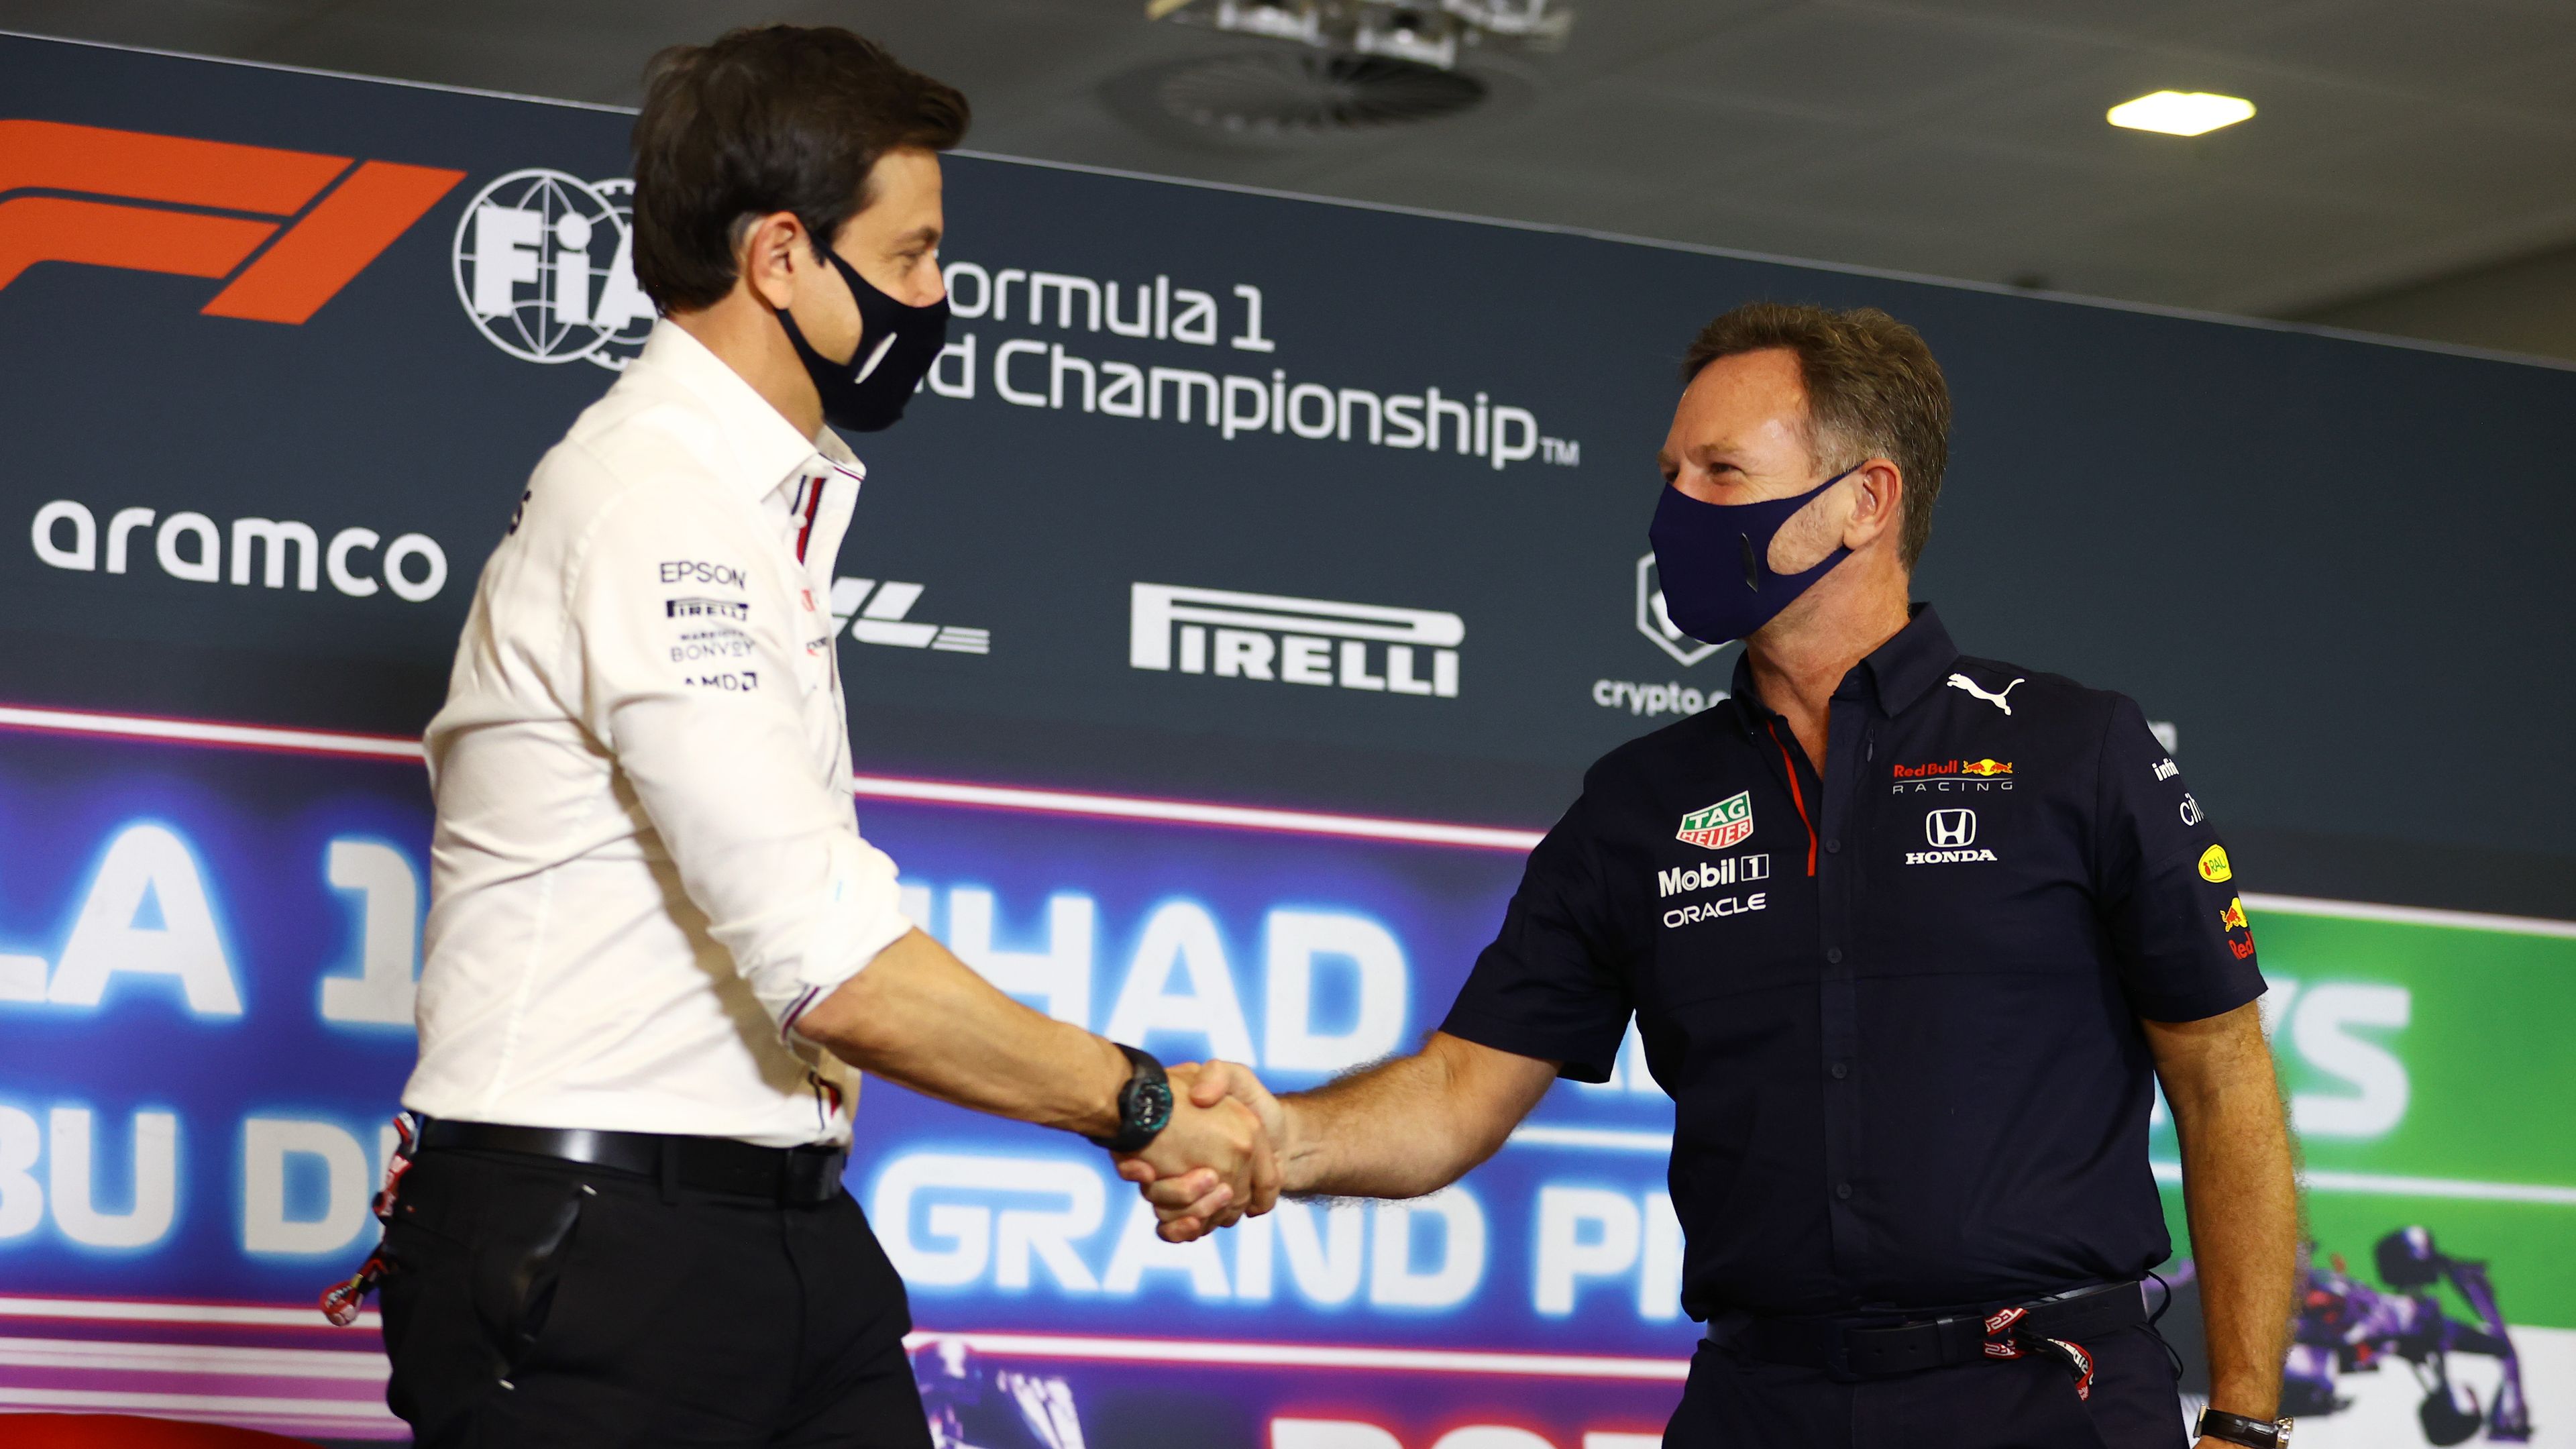 Mercedes, Red Bull team bosses play nice as thrilling Formula 1 title battle nears climax